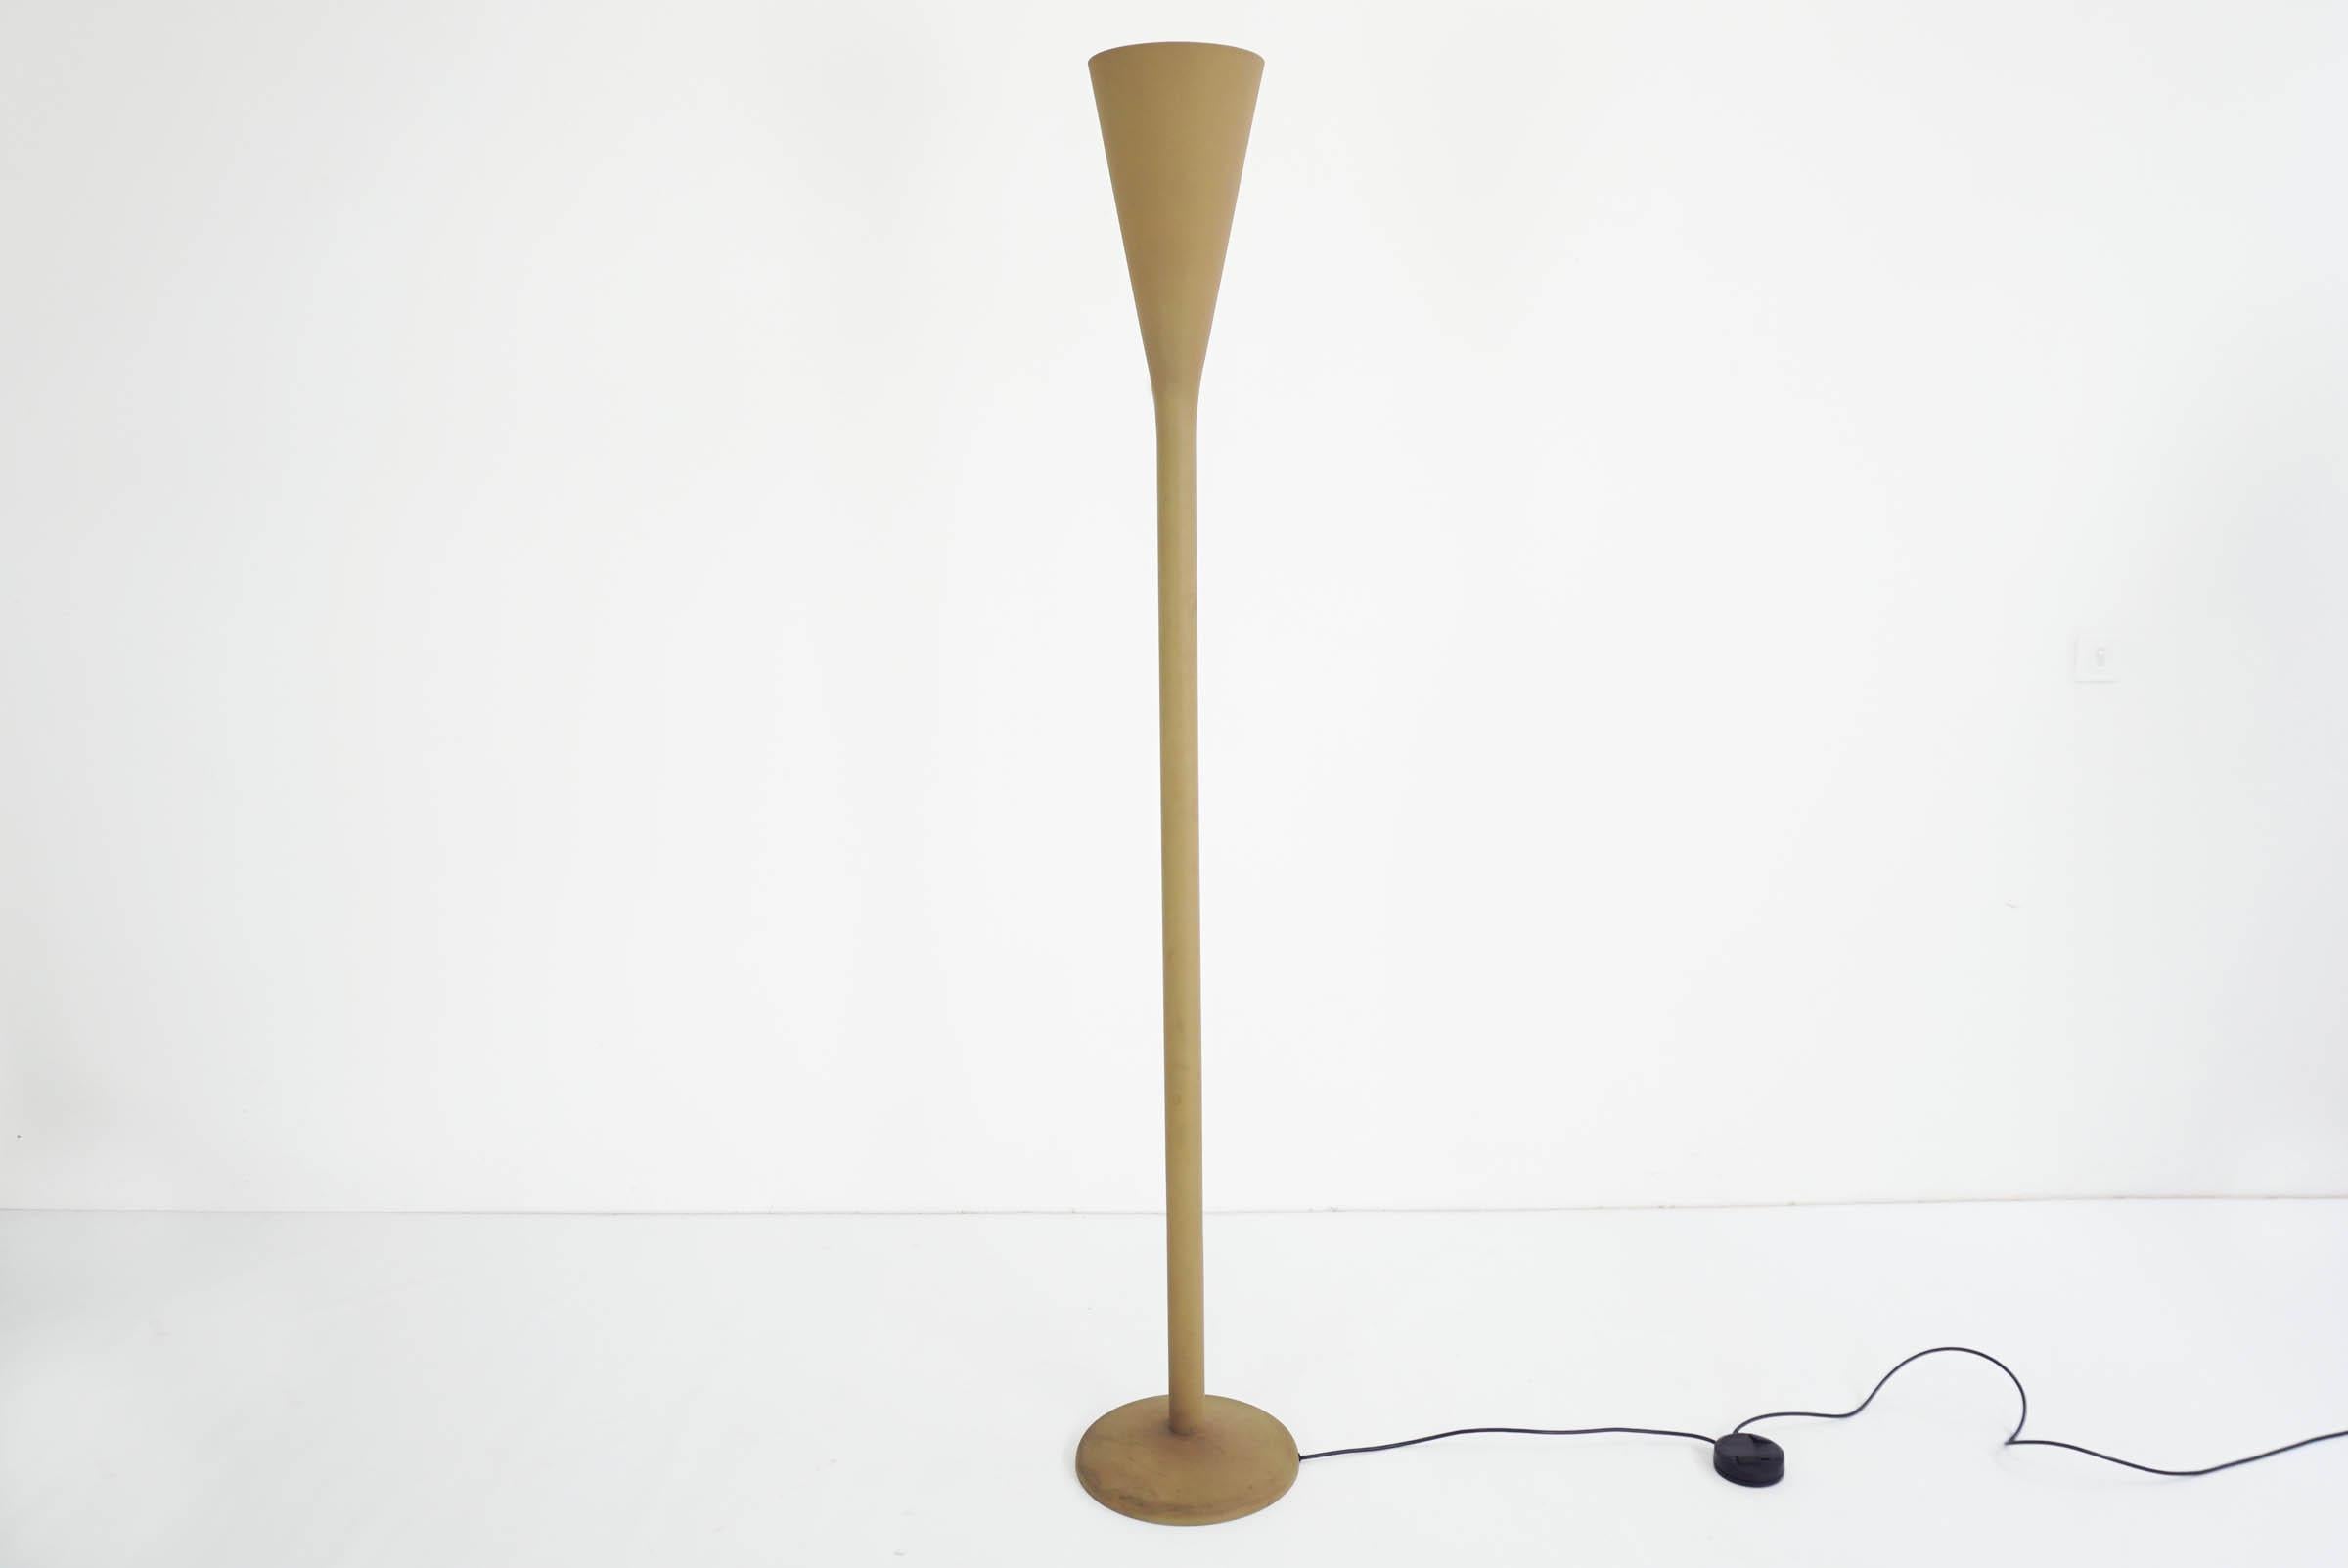 Designed by Pietro Chiesa during the 1933
Tis is a lamp with such a modern personality that its date of birth is hard to believe.
A long, narrow stem opens in an upward swoop to catch an upturned cone that hides the light source.
Luminator was